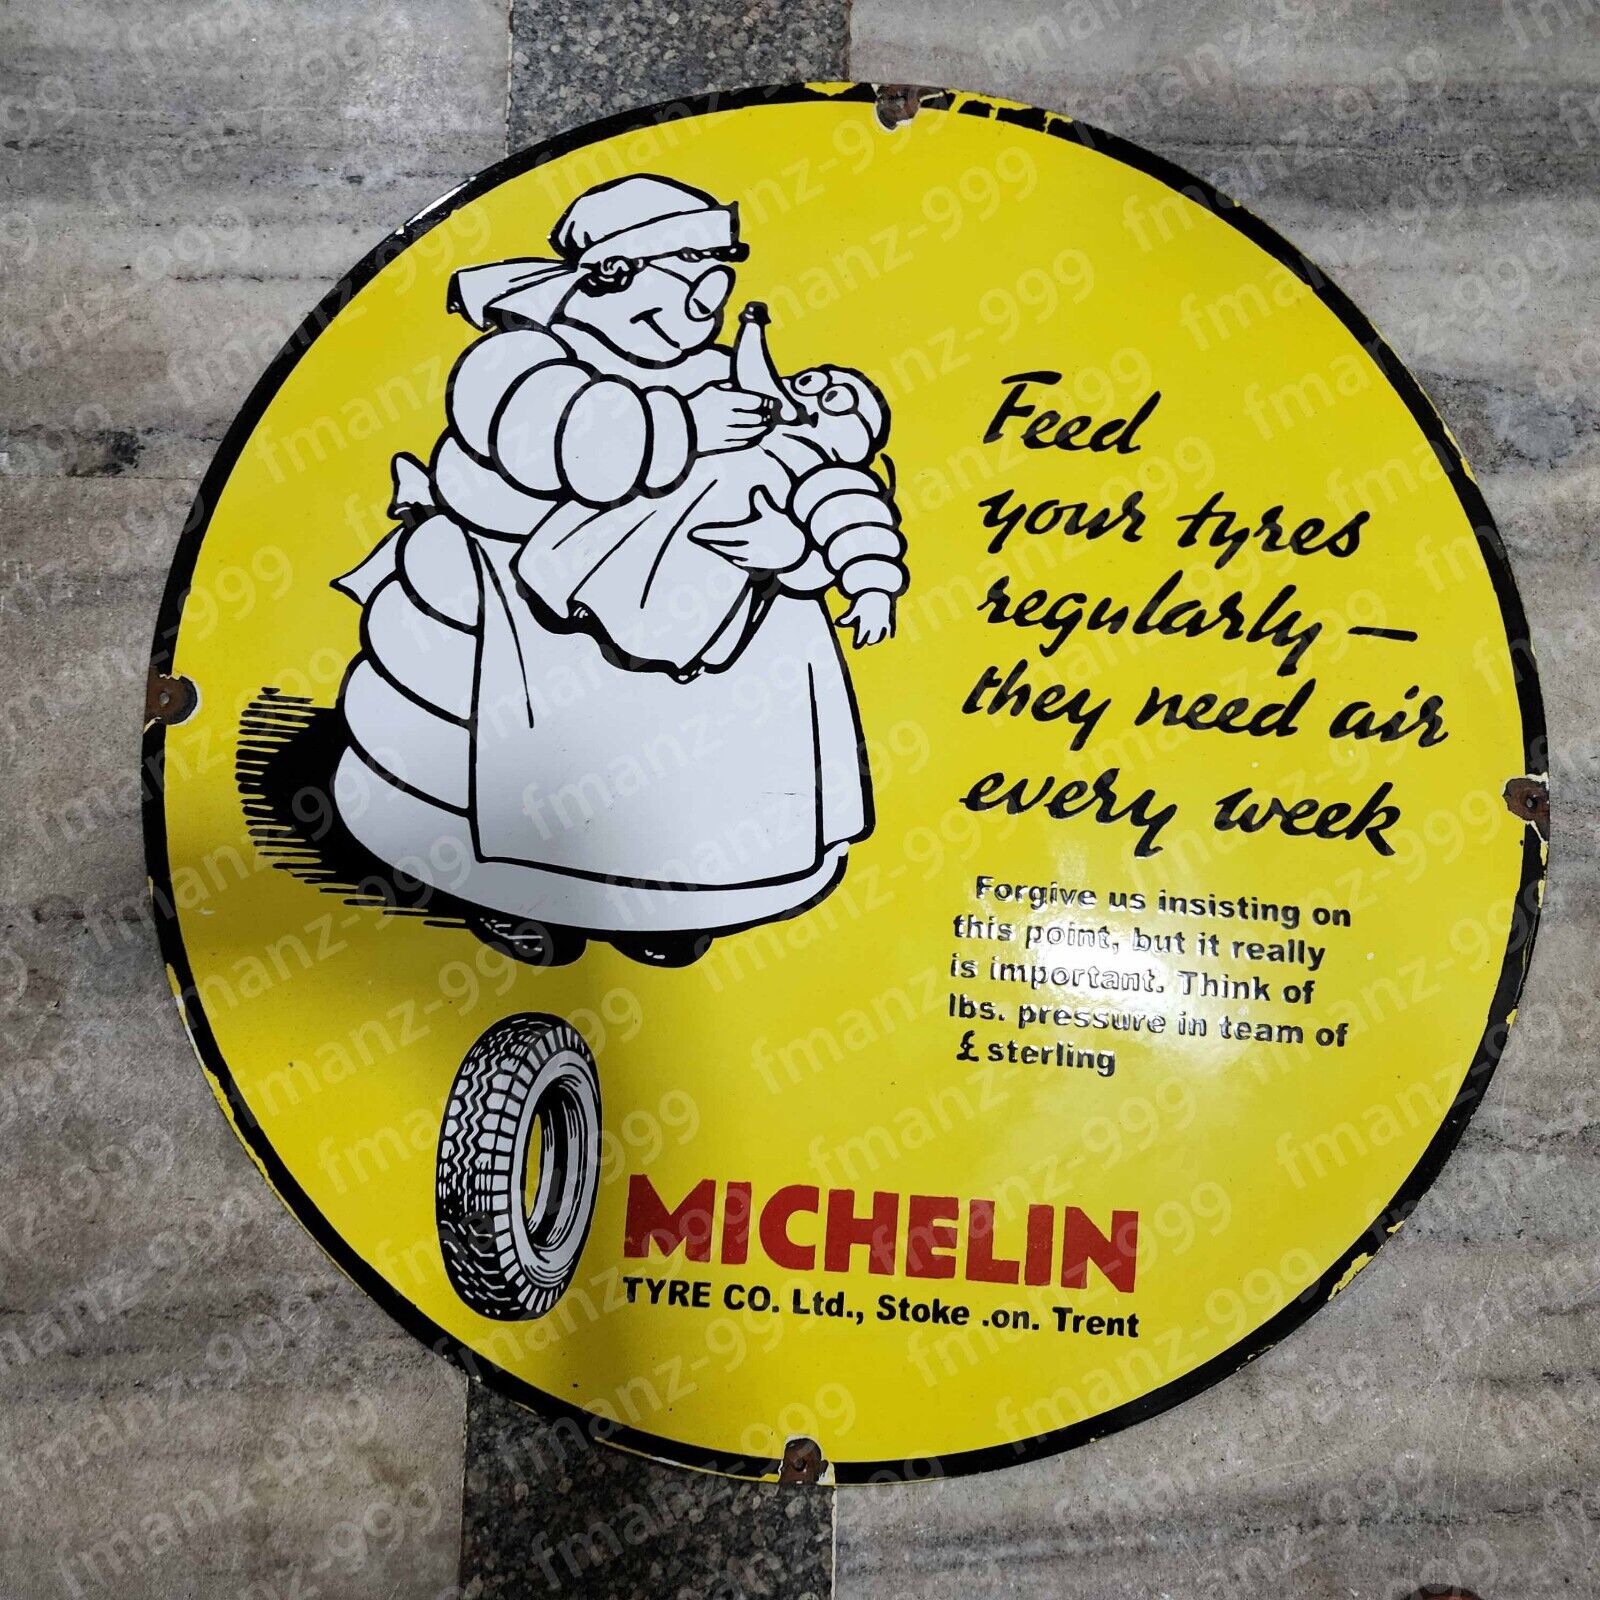 MICHELIN TYRE PORCELAIN ENAMEL SIGN 30 INCHES ROUND